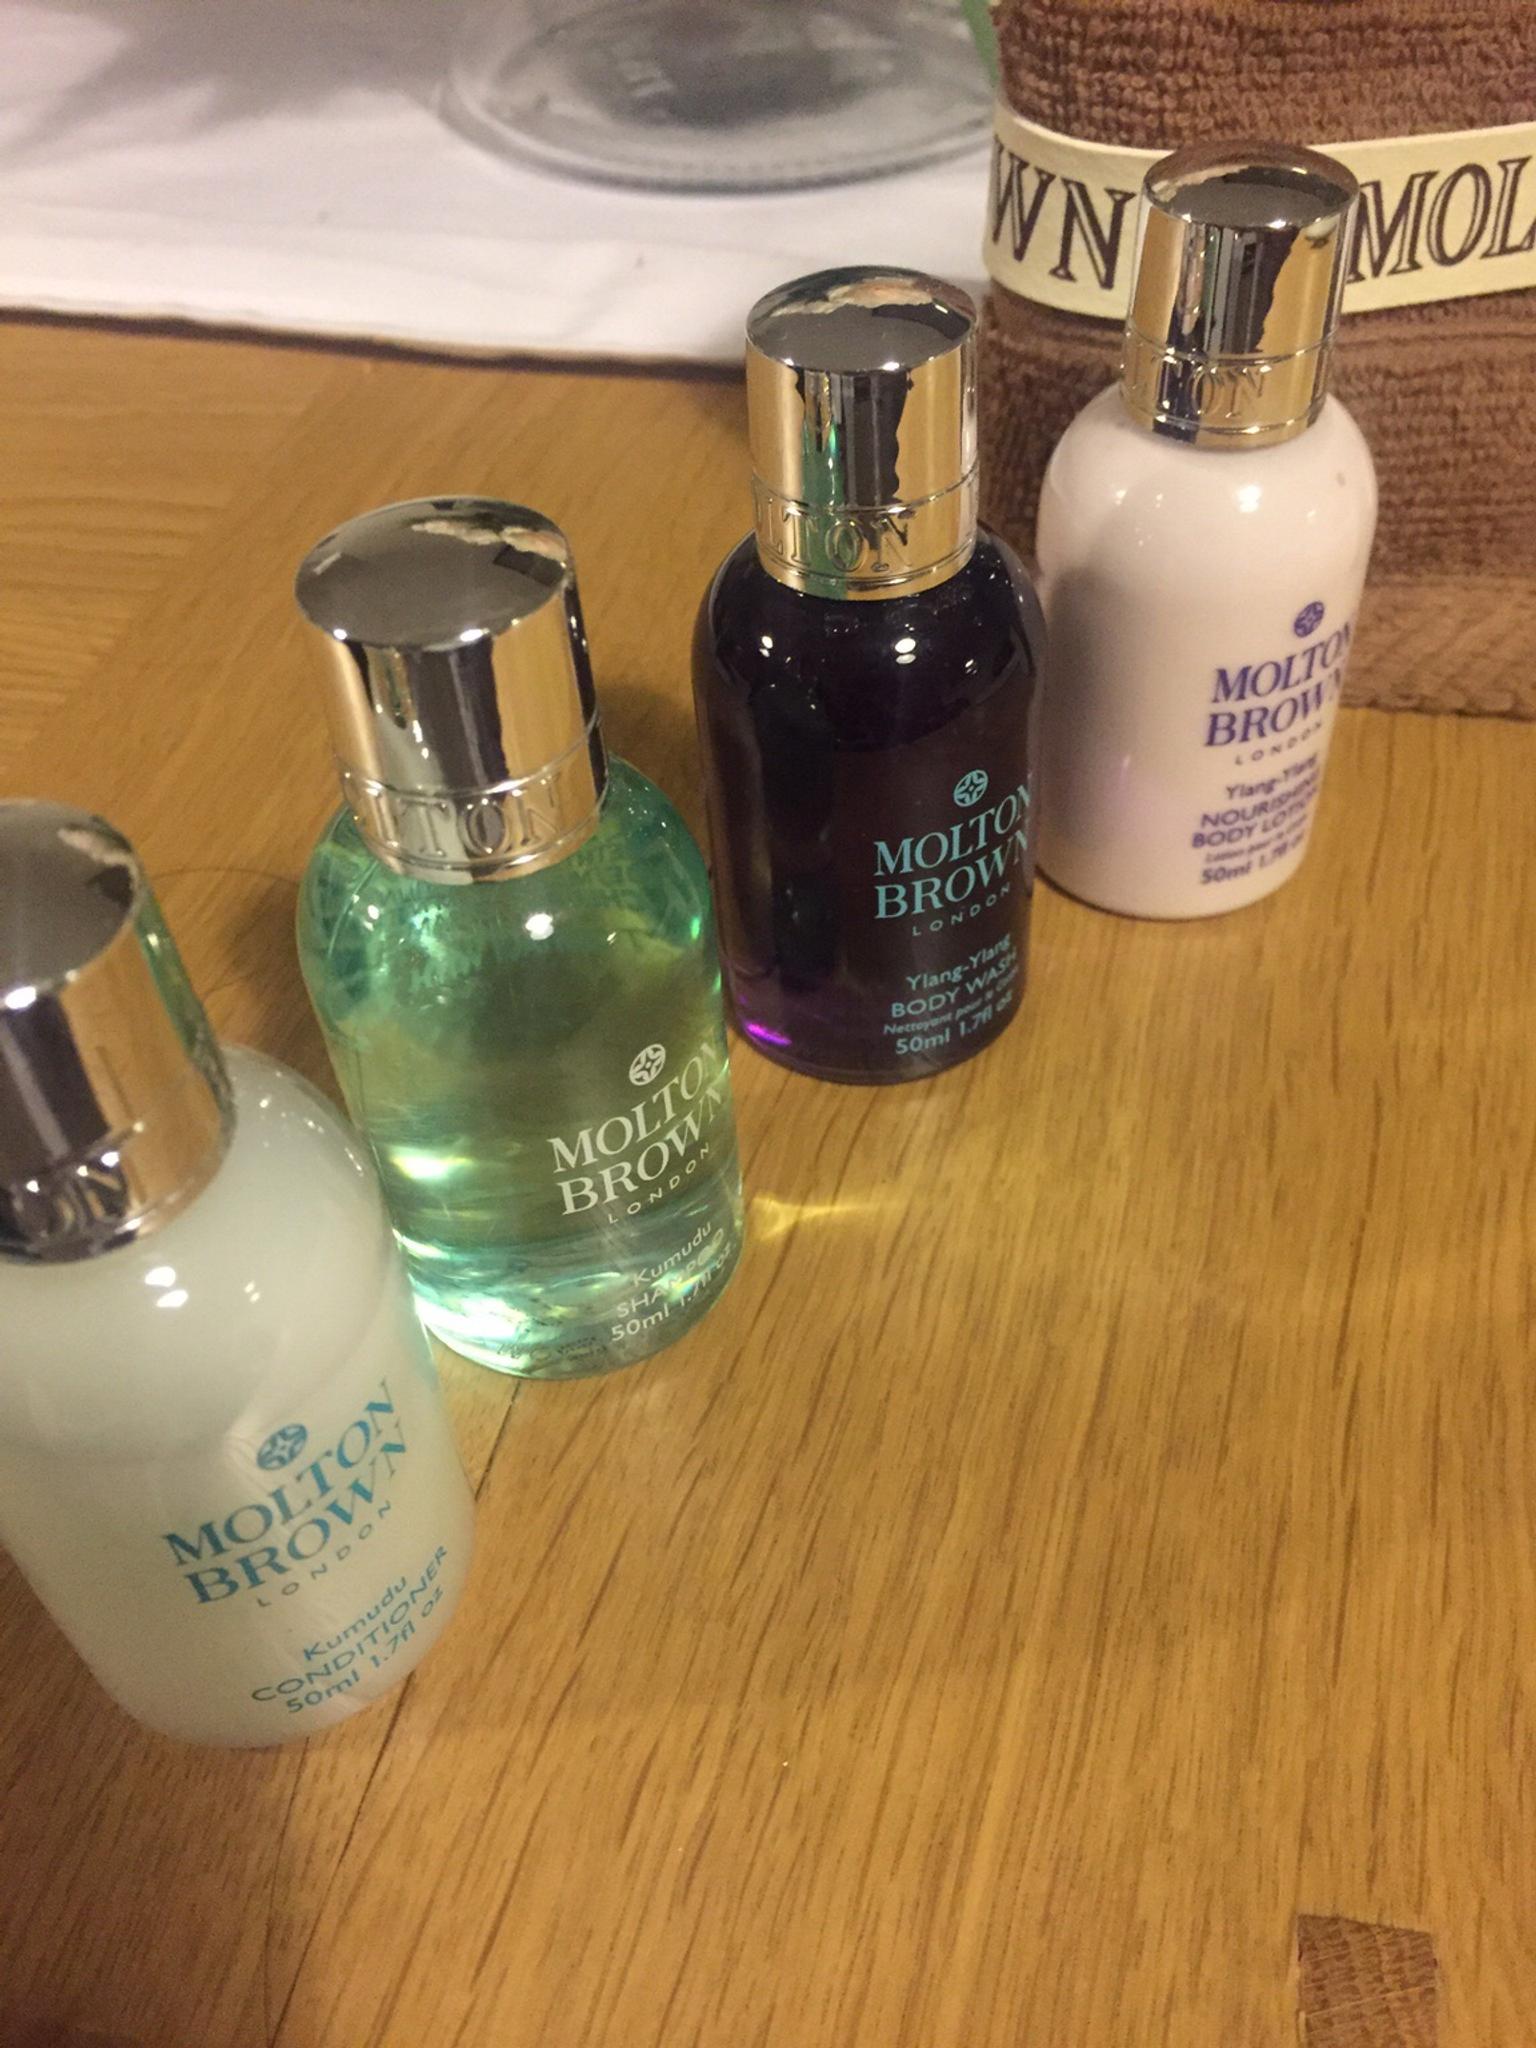 NEW molton brown gift set in WS10